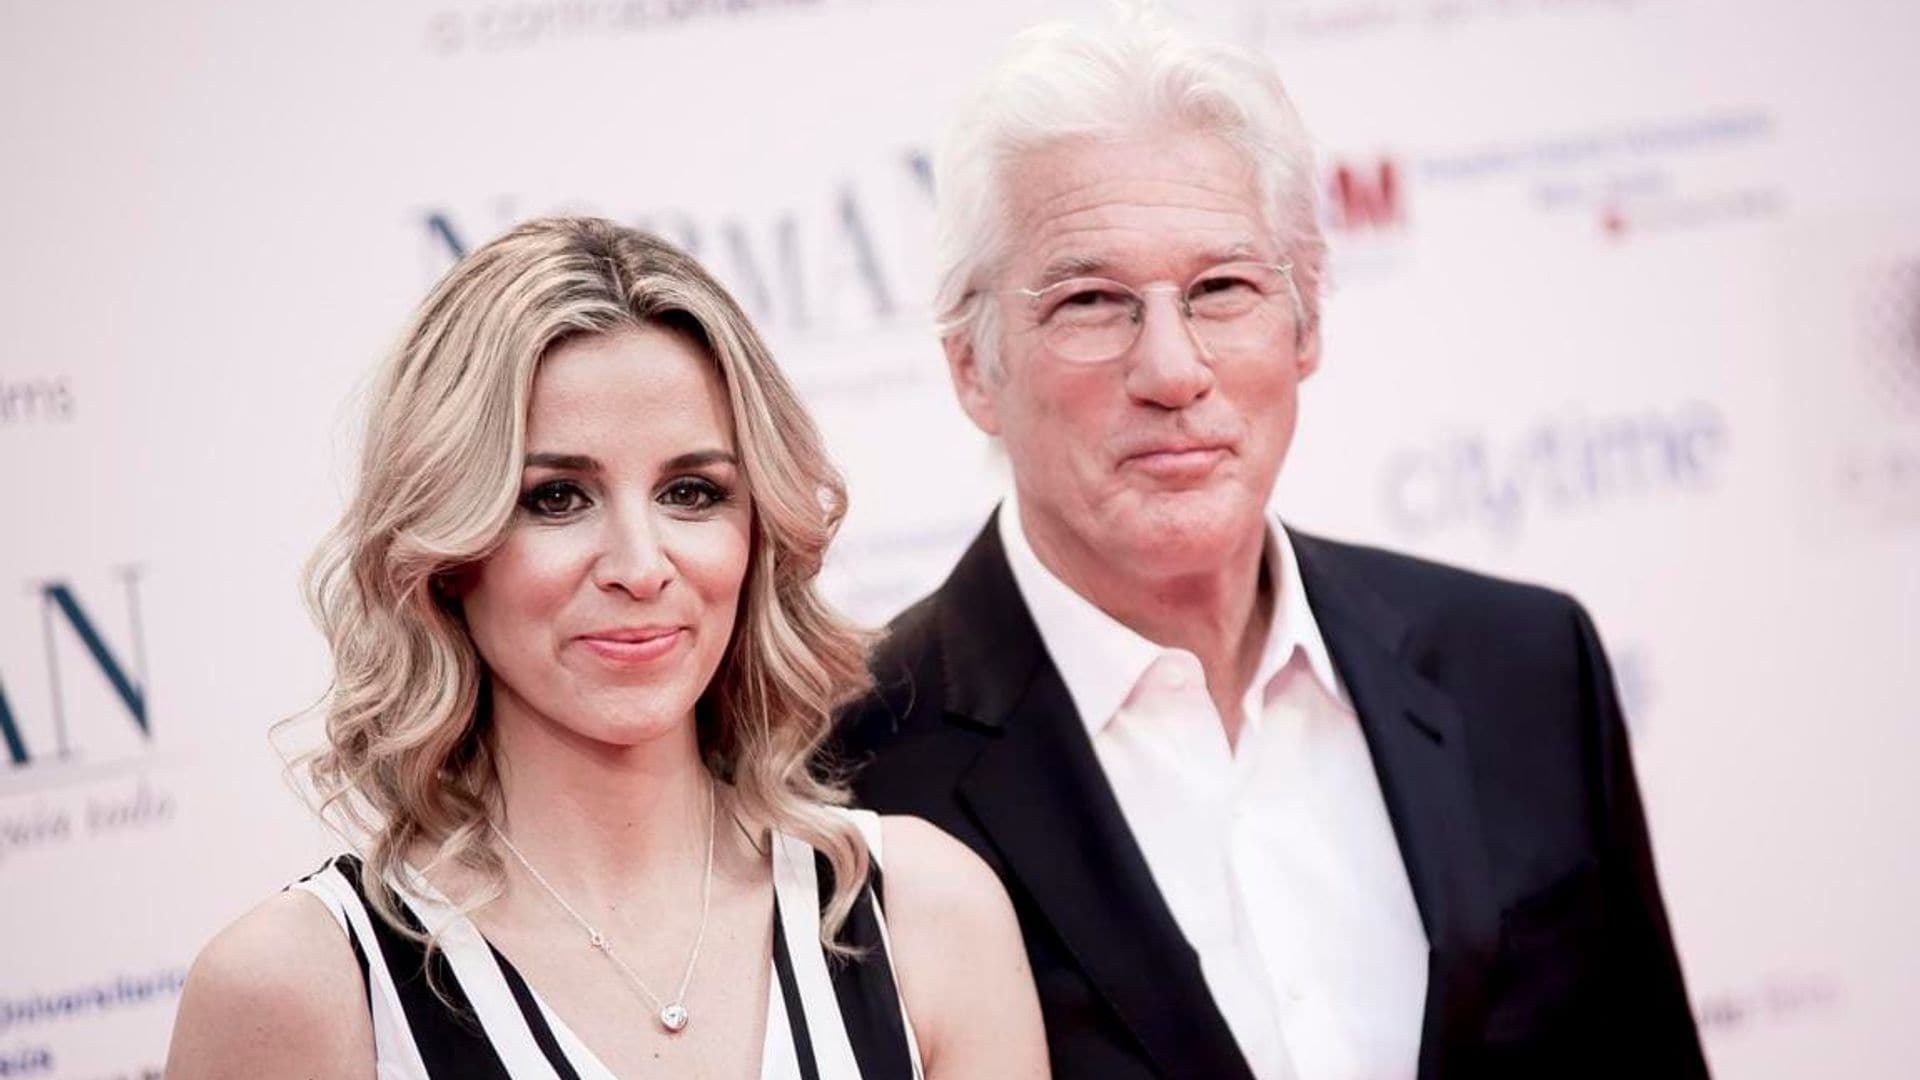 Richard Gere and wife Alejandra Silva welcome second baby in secret